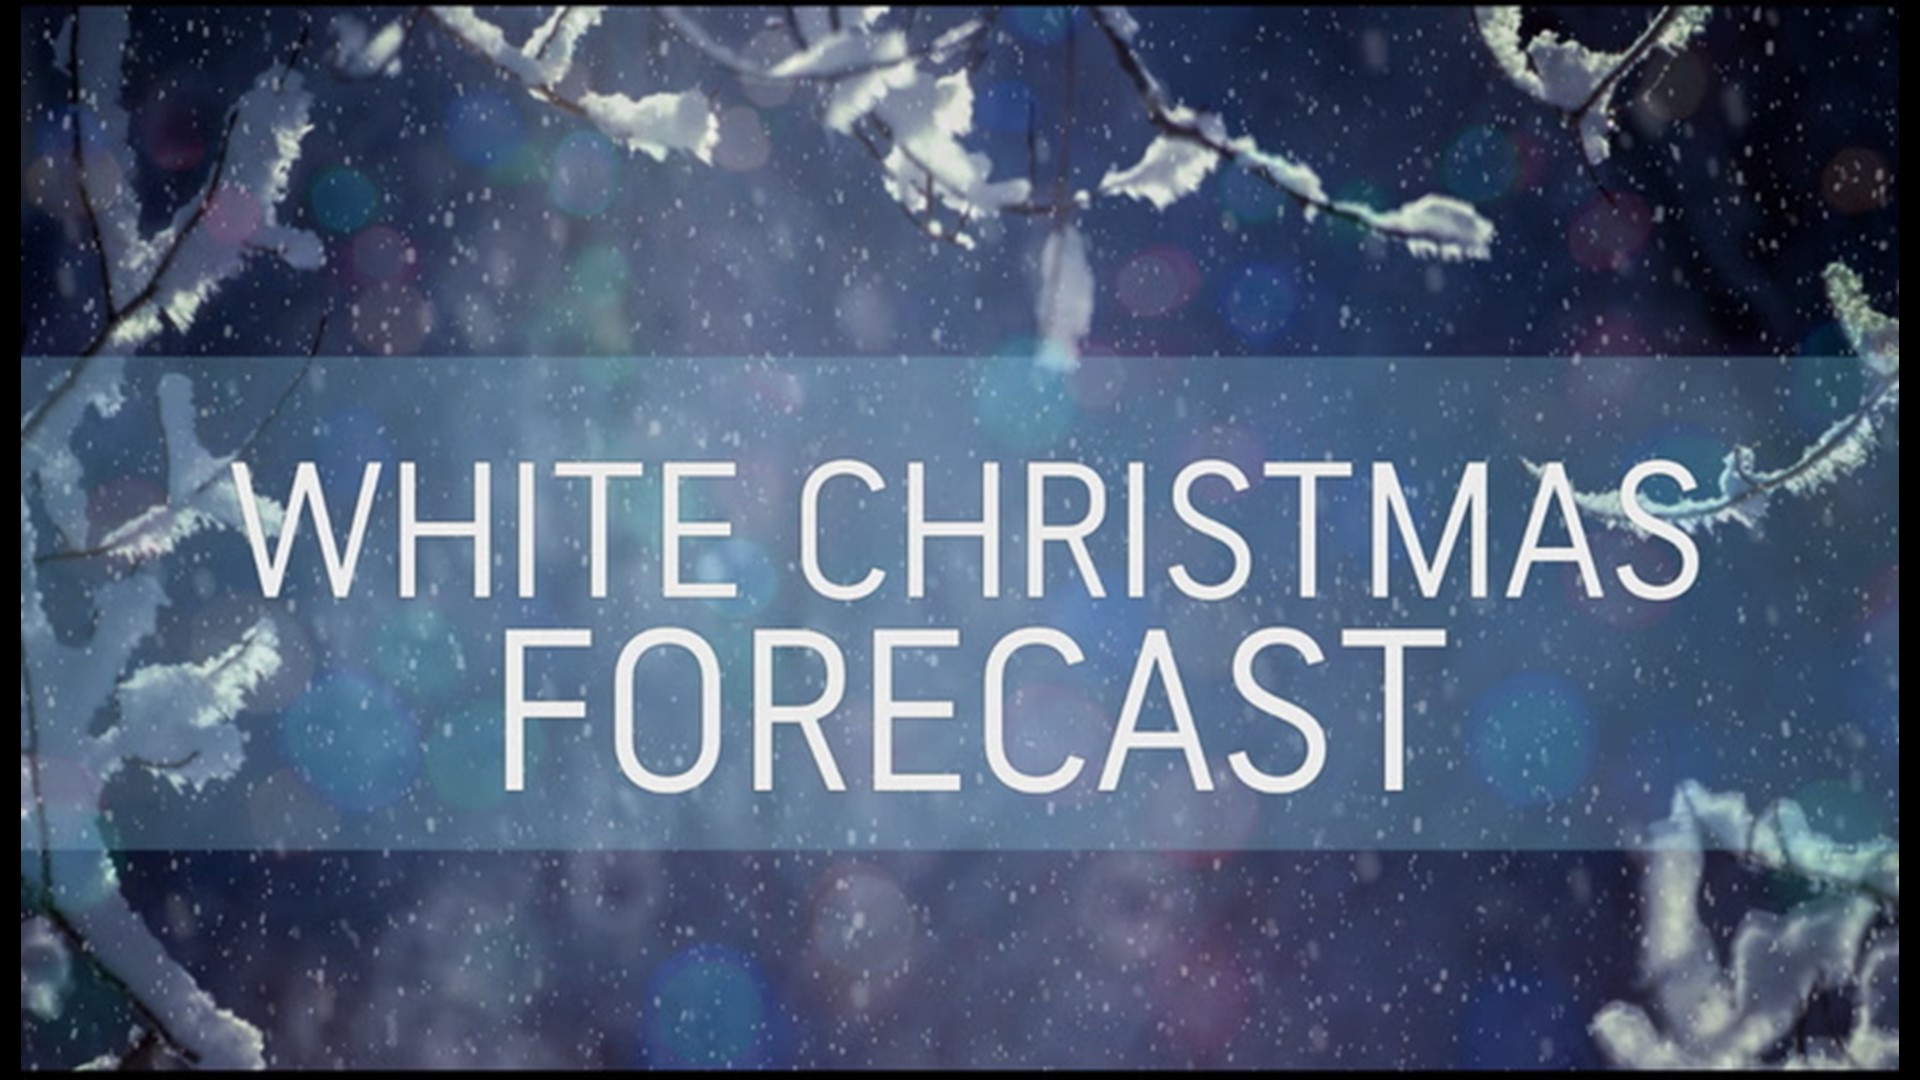 Will it be a white Christmas?